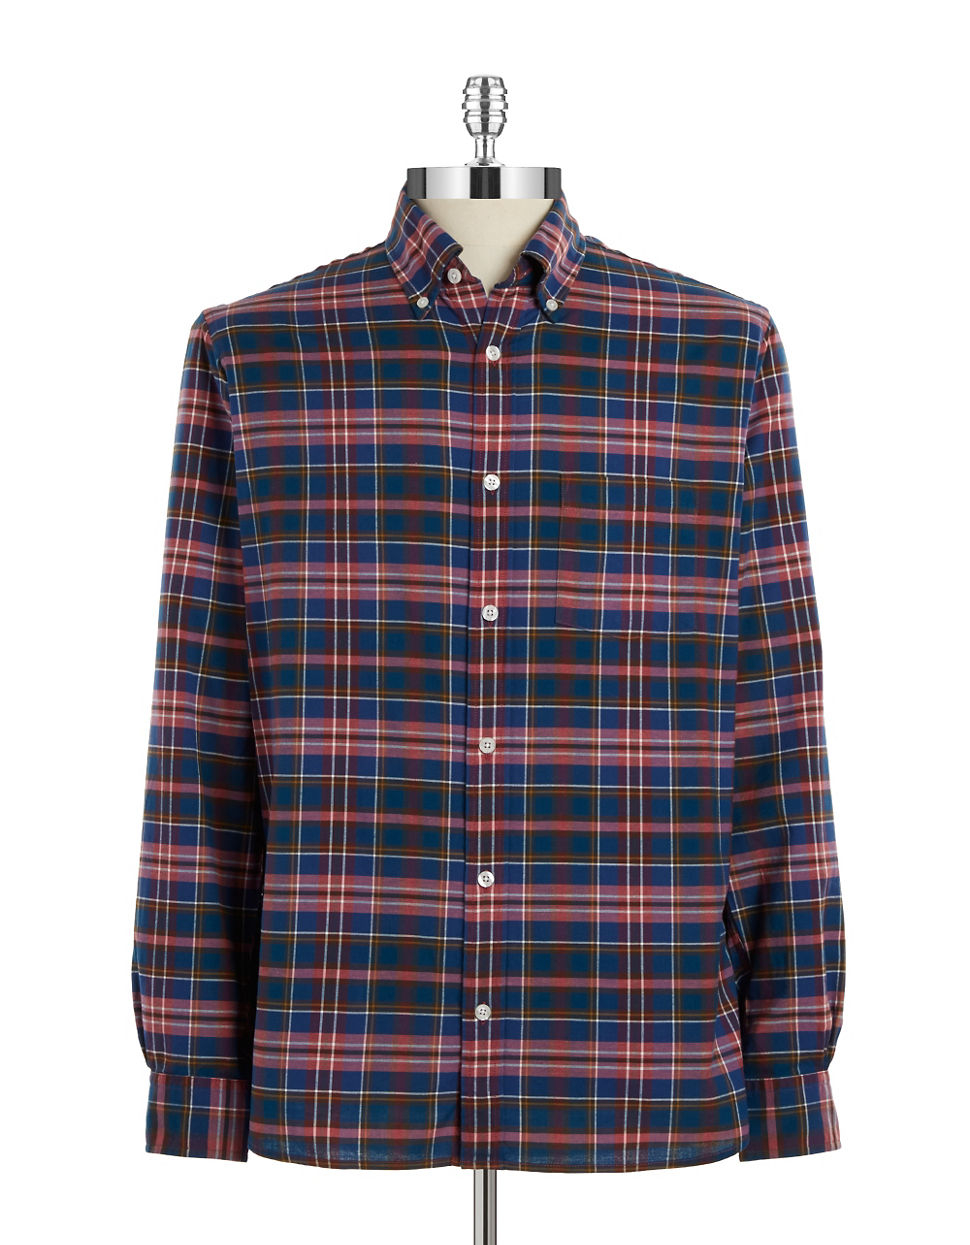 Lyst - Brooks Brothers Red Fleece Plaid Sportshirt for Men